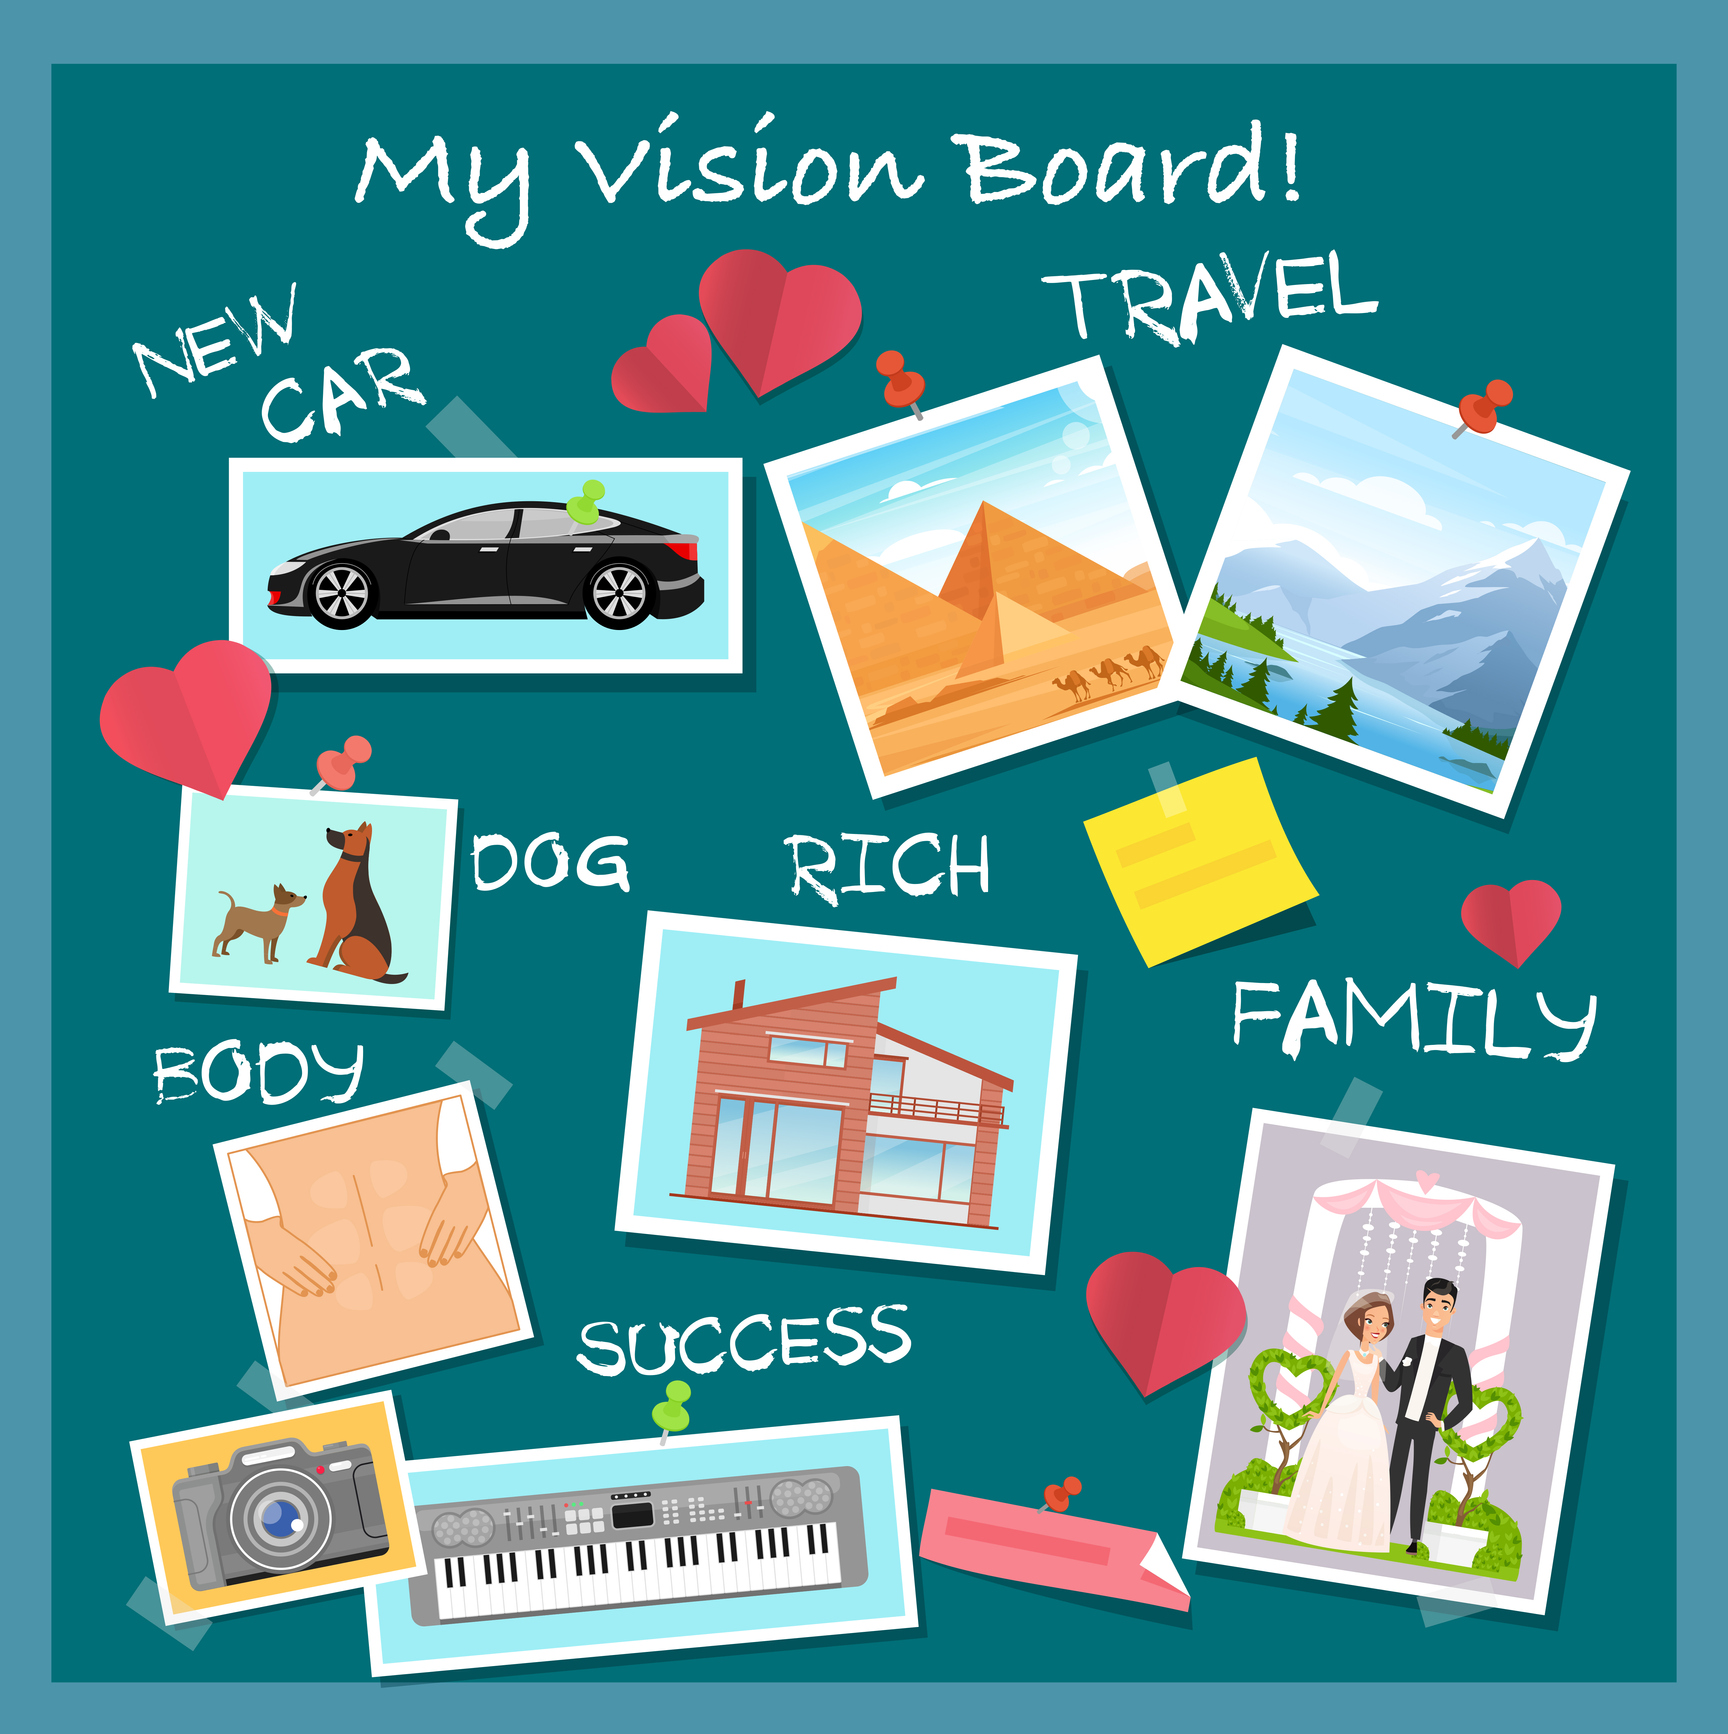 Learn how to create your own vision board and get yourself motivated to make it a reality!